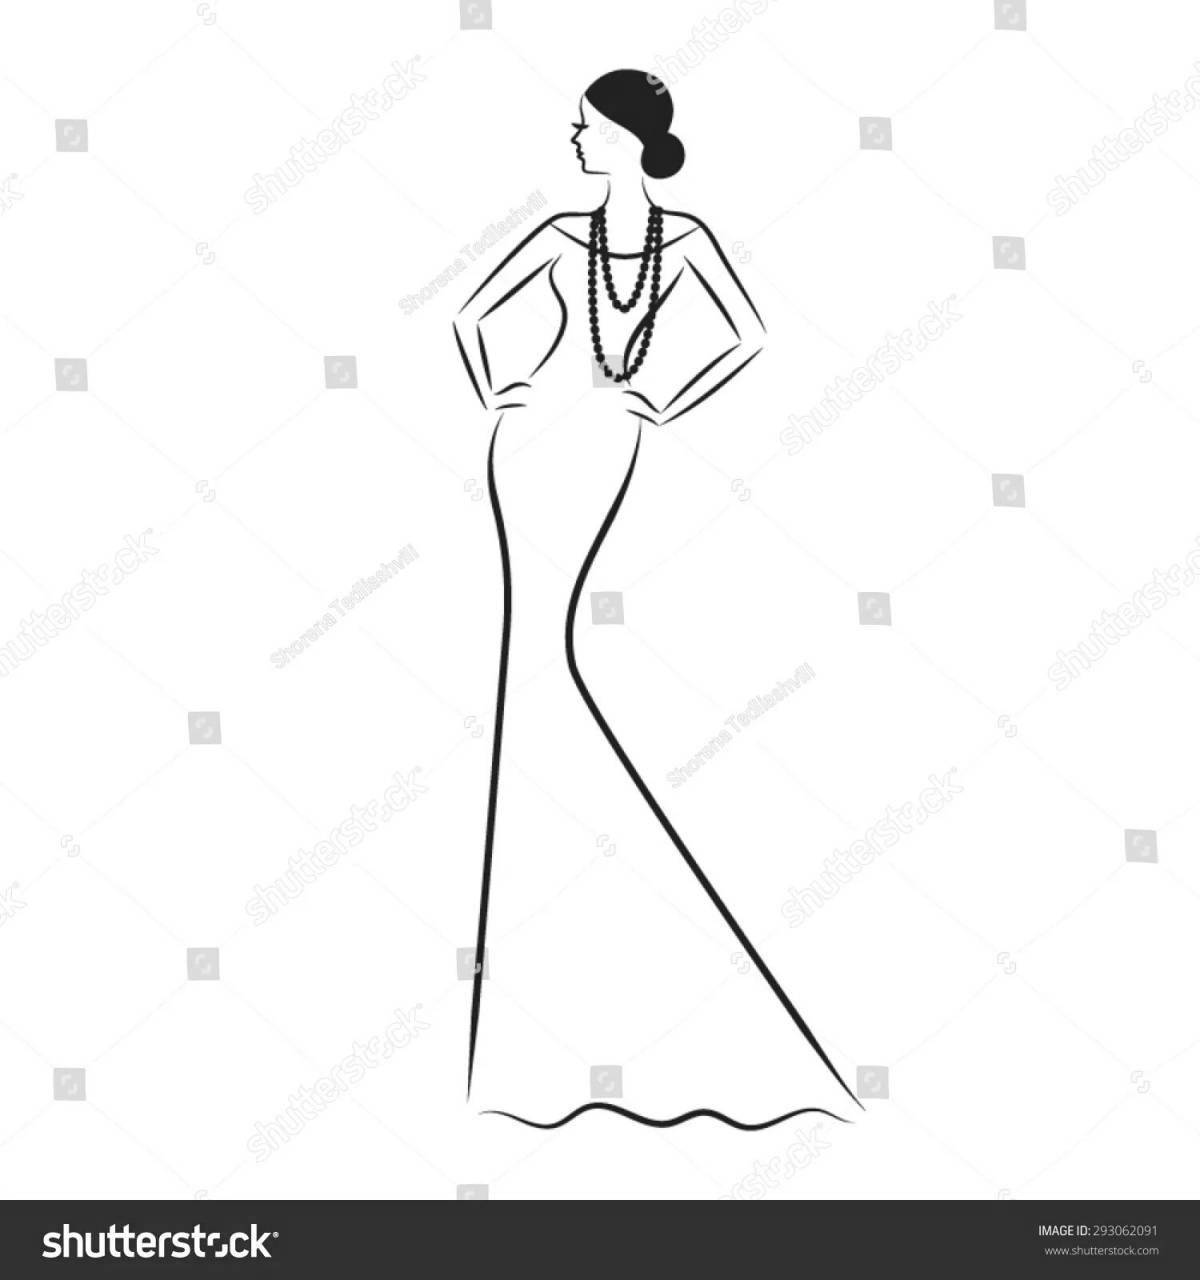 Violent coloring silhouette of a girl in a dress